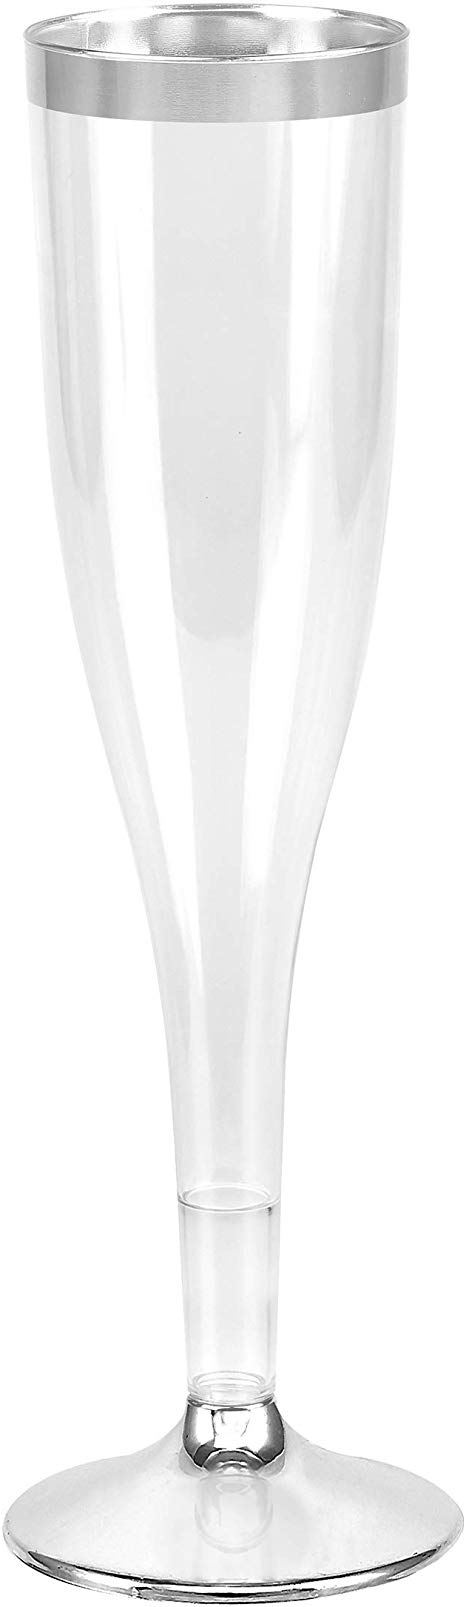 Plastic Champagne Glasses with Silver Rim, 50-Pack Disposable or Reusable Wine Glasses, 7 oz